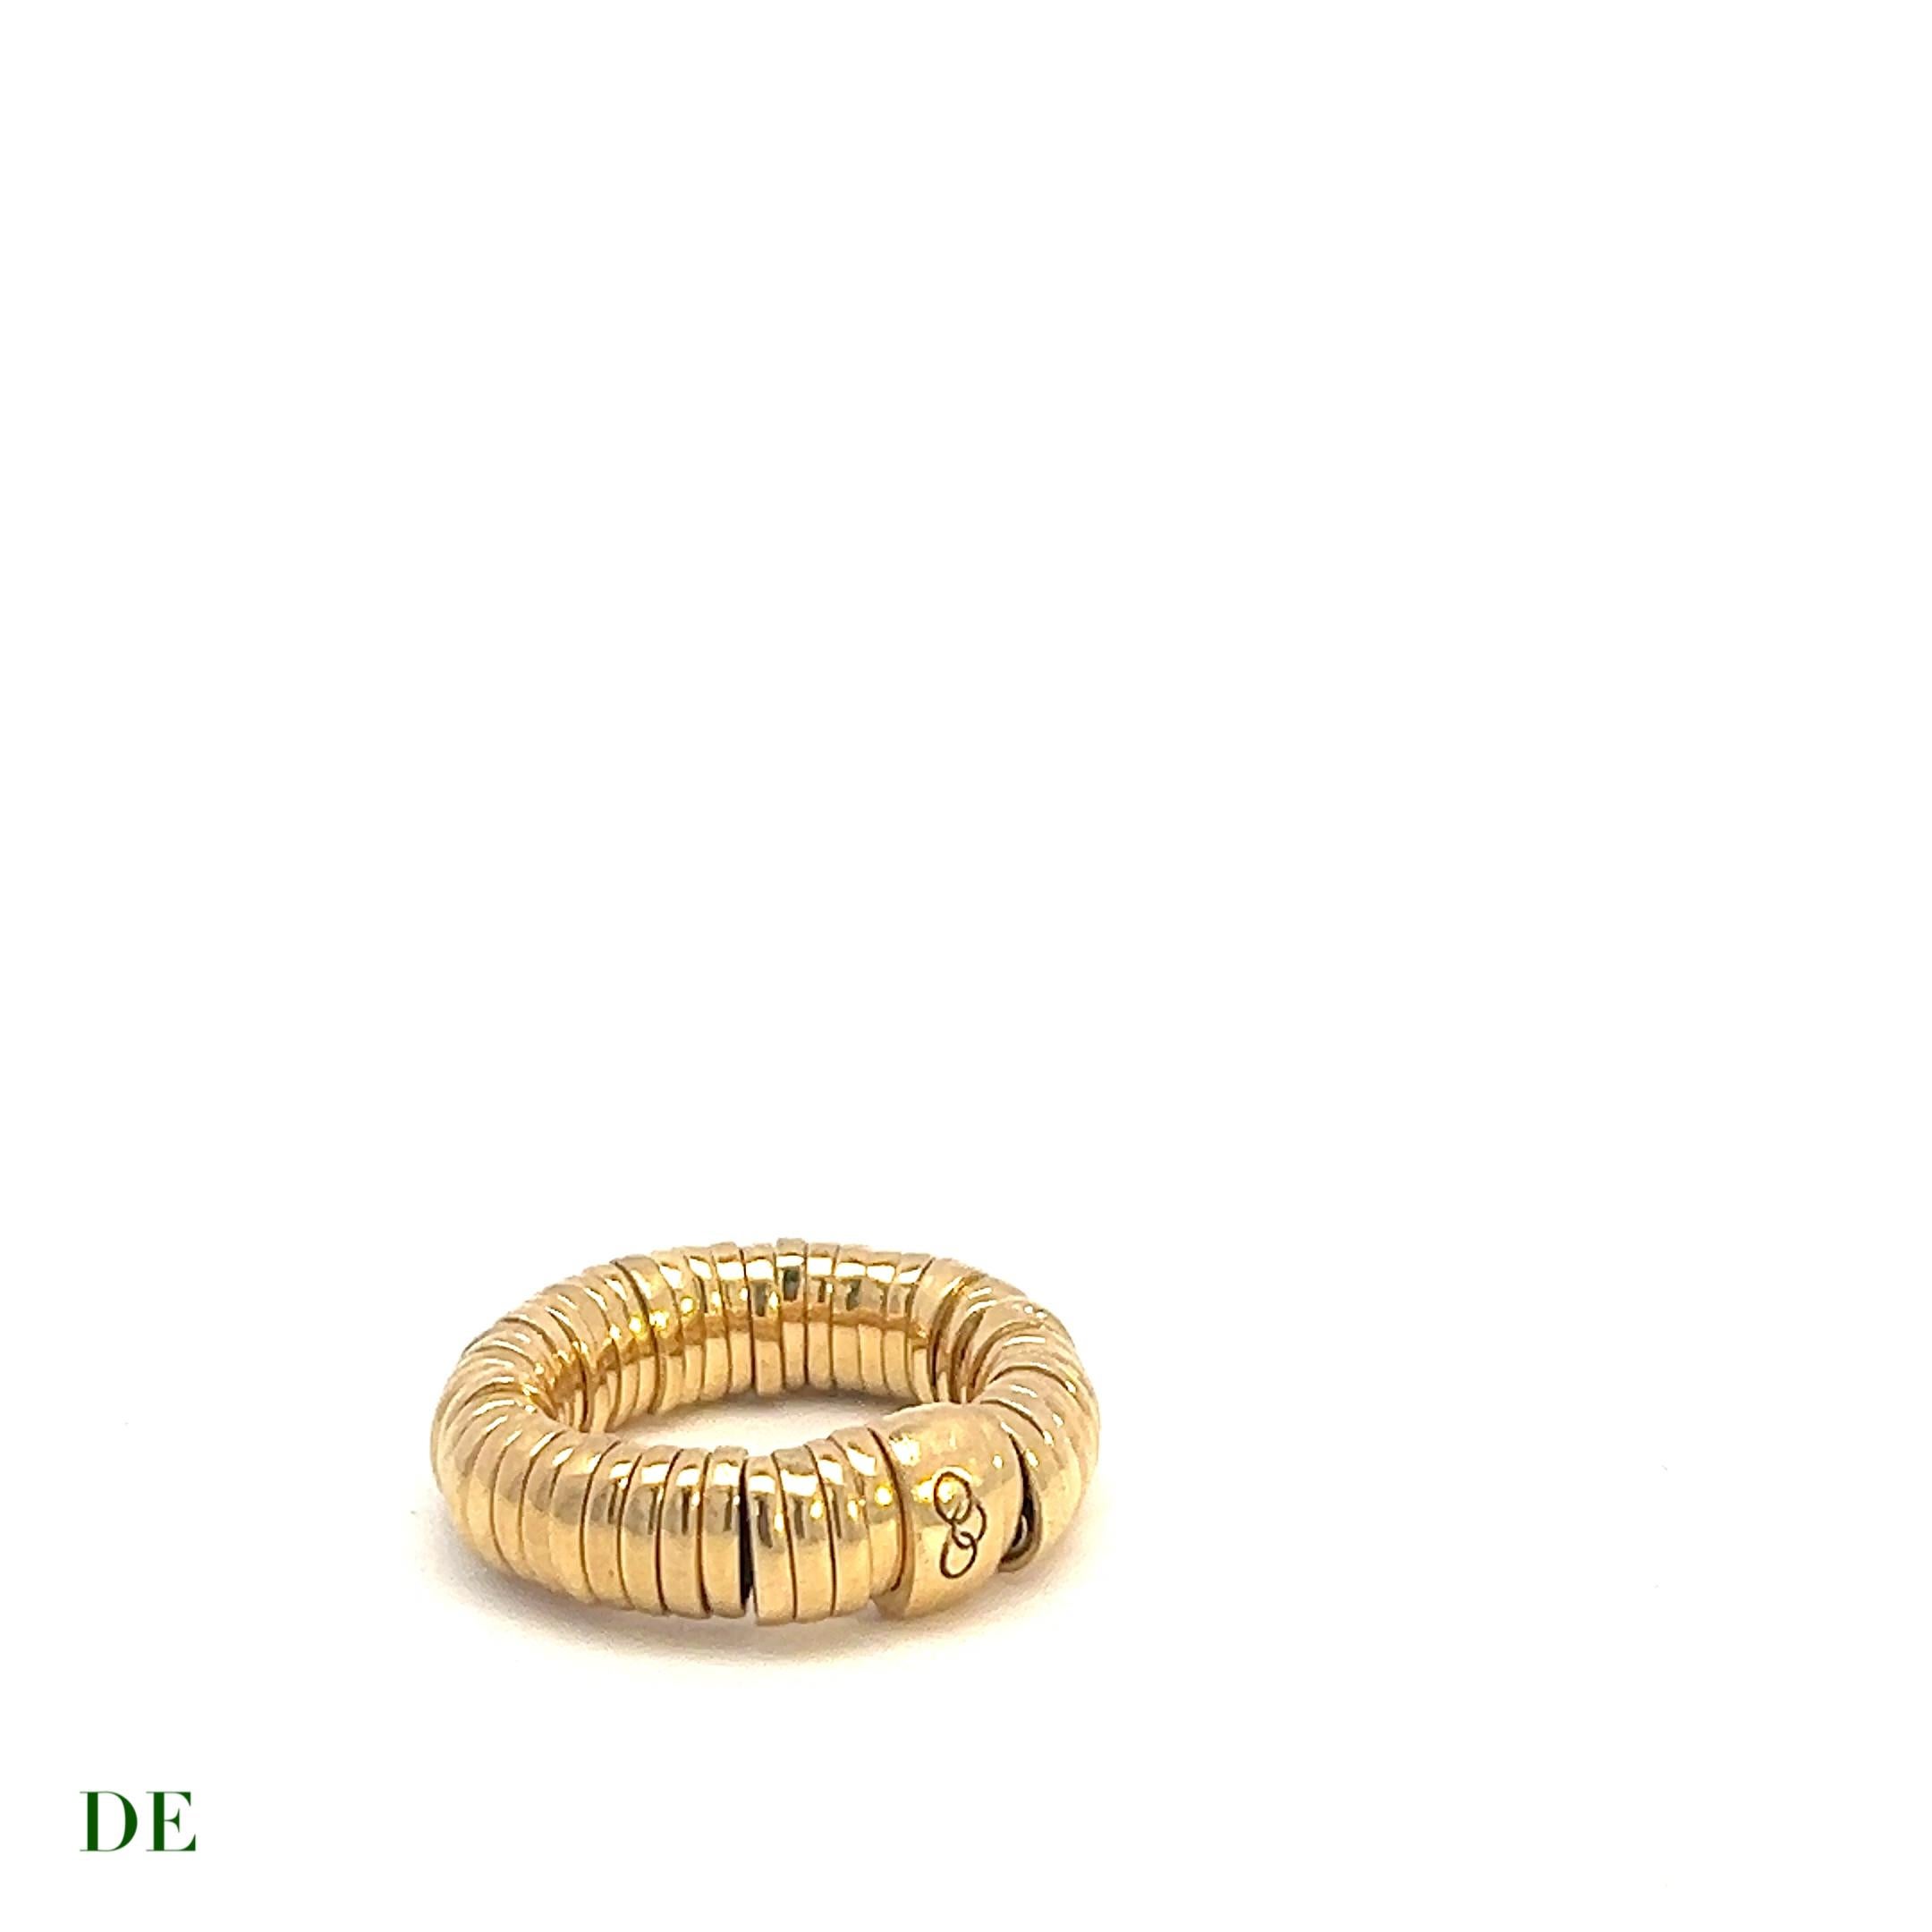 Timeless Elegance: Very Rare Discontinued Links of London 18k Yellow Gold Sweetie Ring

Embrace the allure of this very rare and sought-after Links of London 18k Yellow Gold Sweetie Ring. Crafted with impeccable artistry, this ring is a true